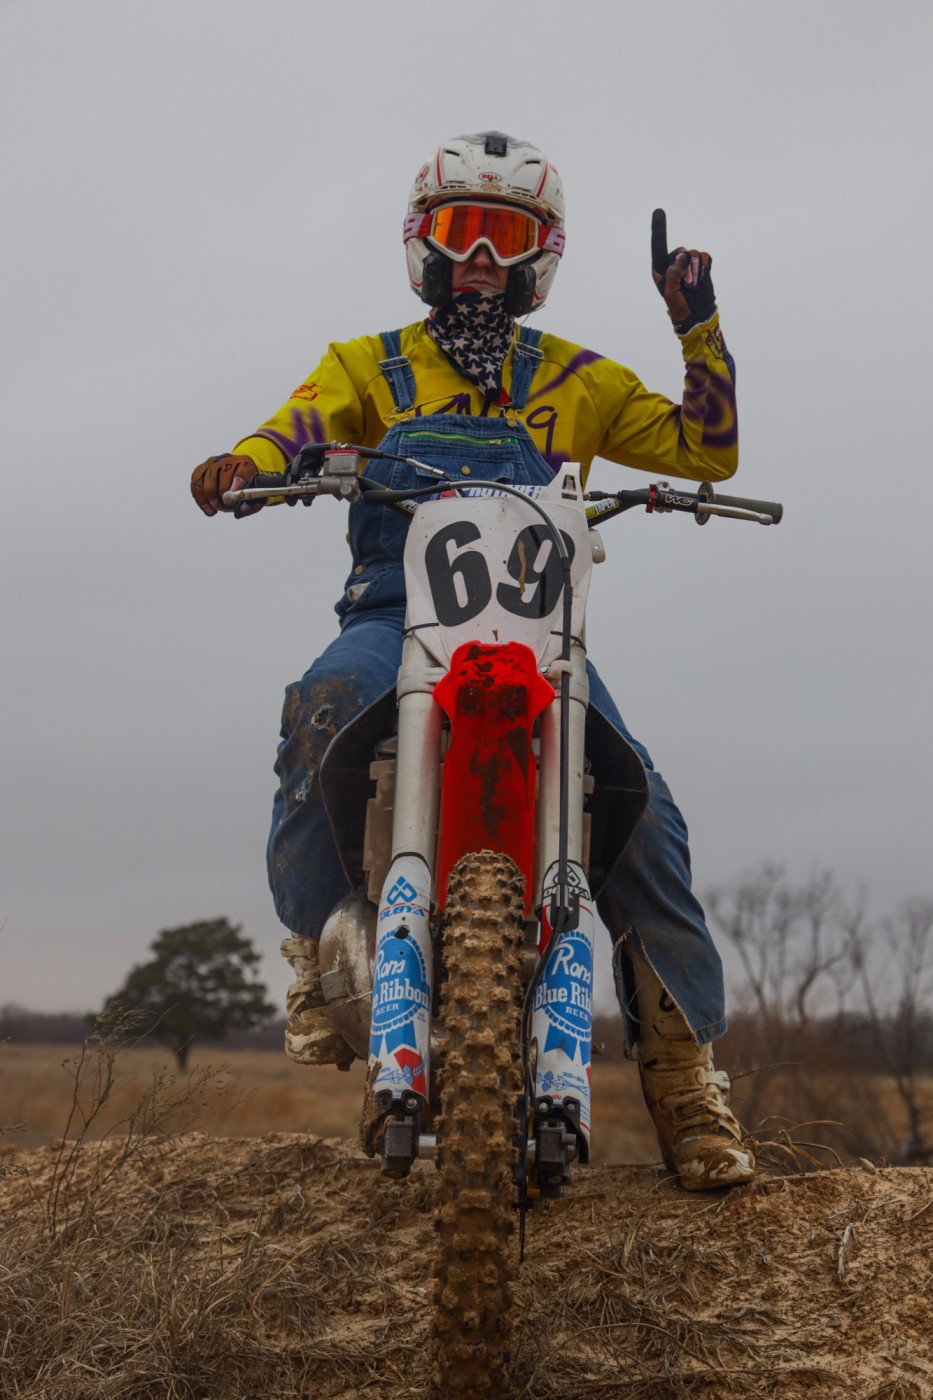 Ron Rides a New Dirt Bike Track in Oklahoma